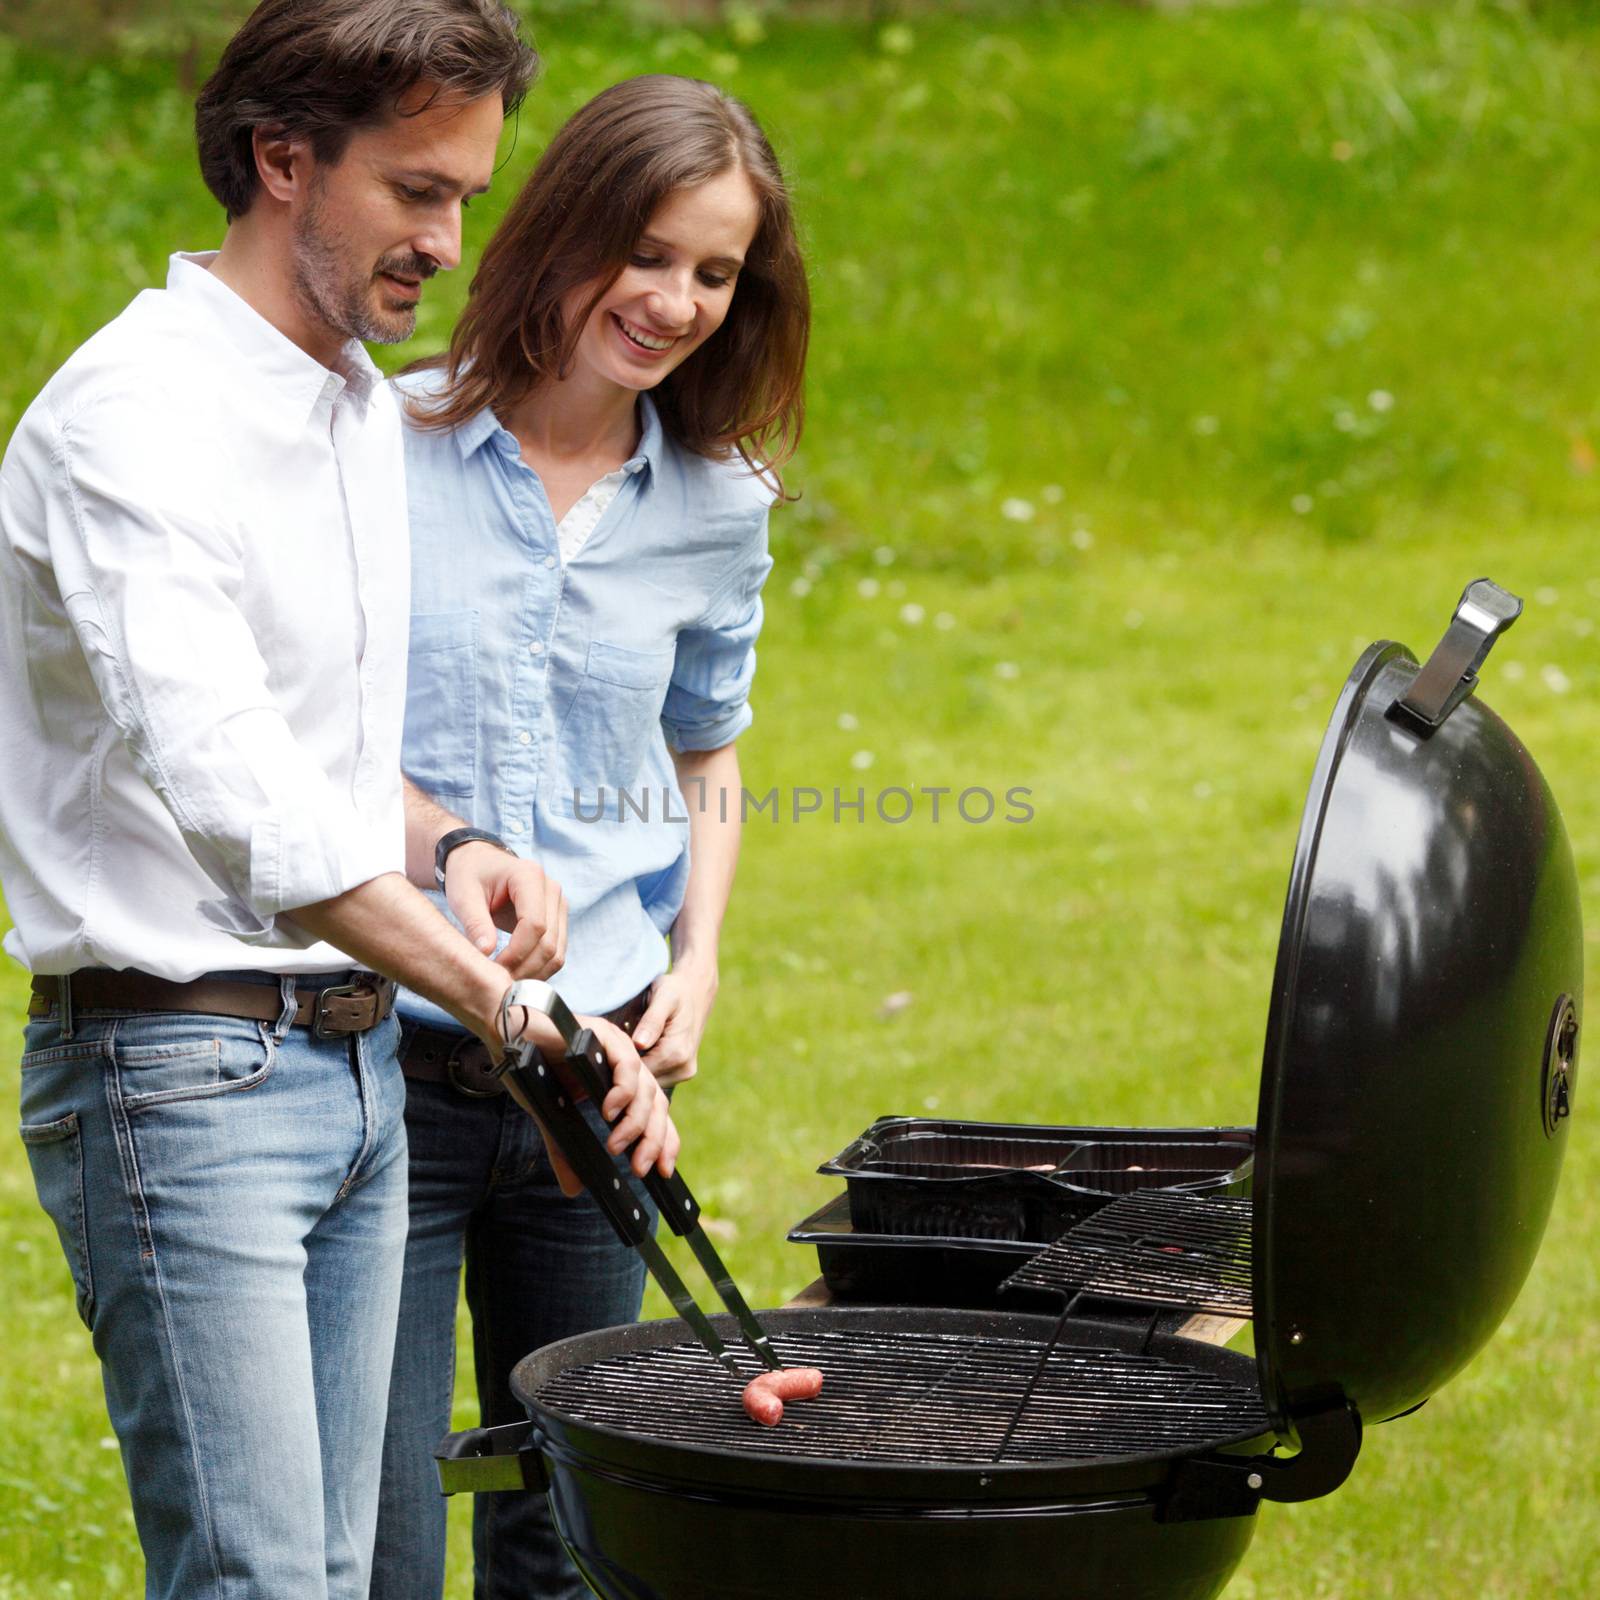 Couple cooking on barbecue  by ALotOfPeople